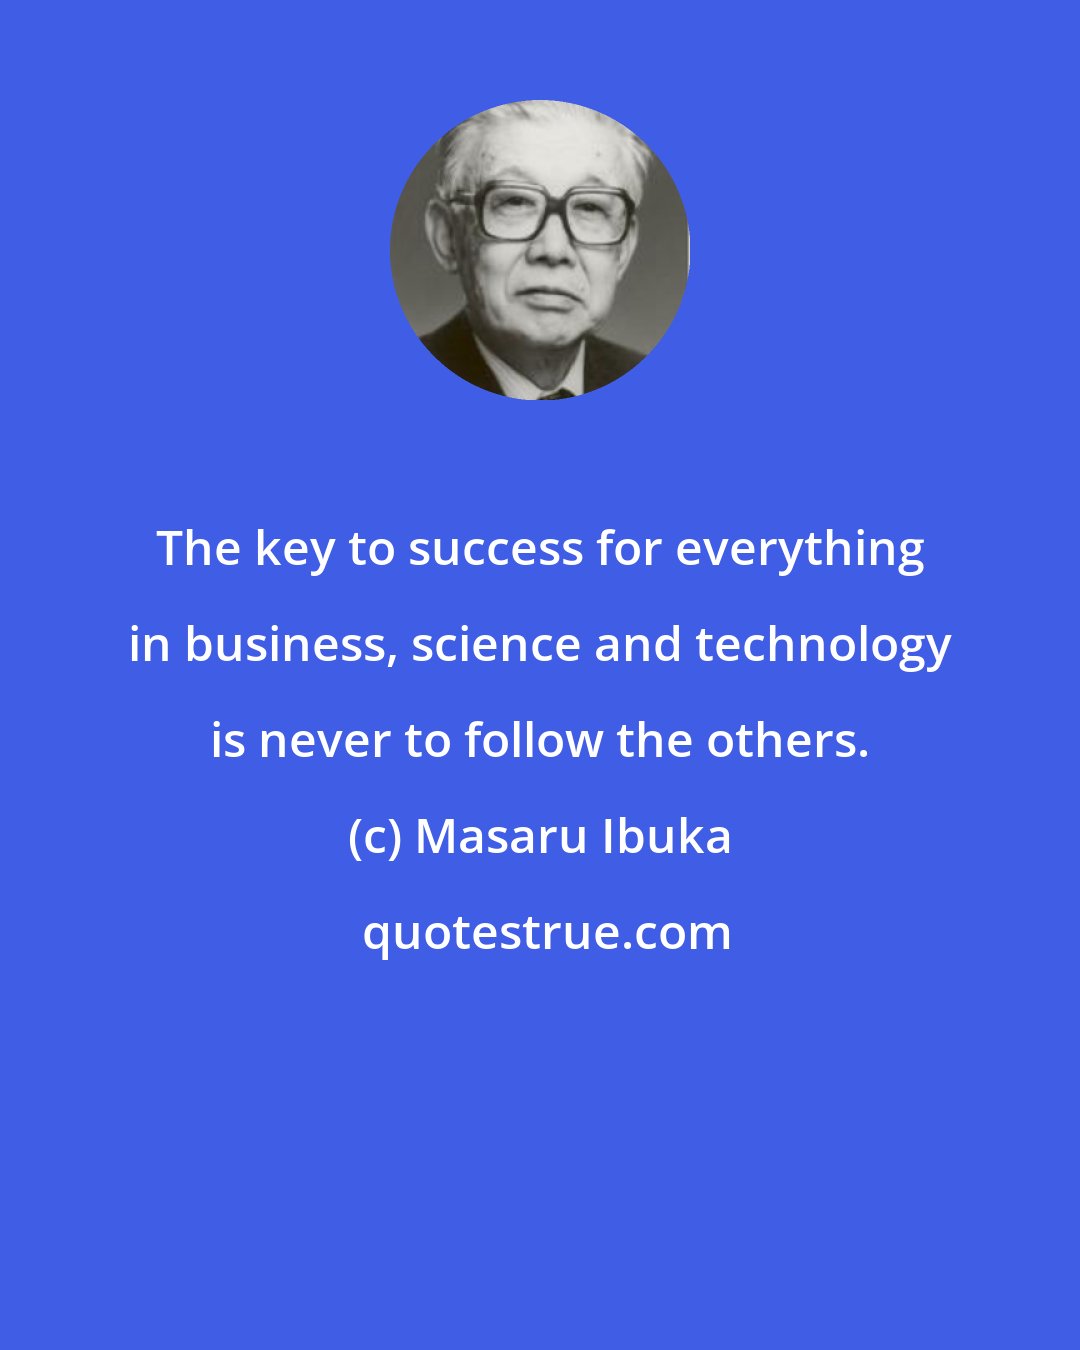 Masaru Ibuka: The key to success for everything in business, science and technology is never to follow the others.